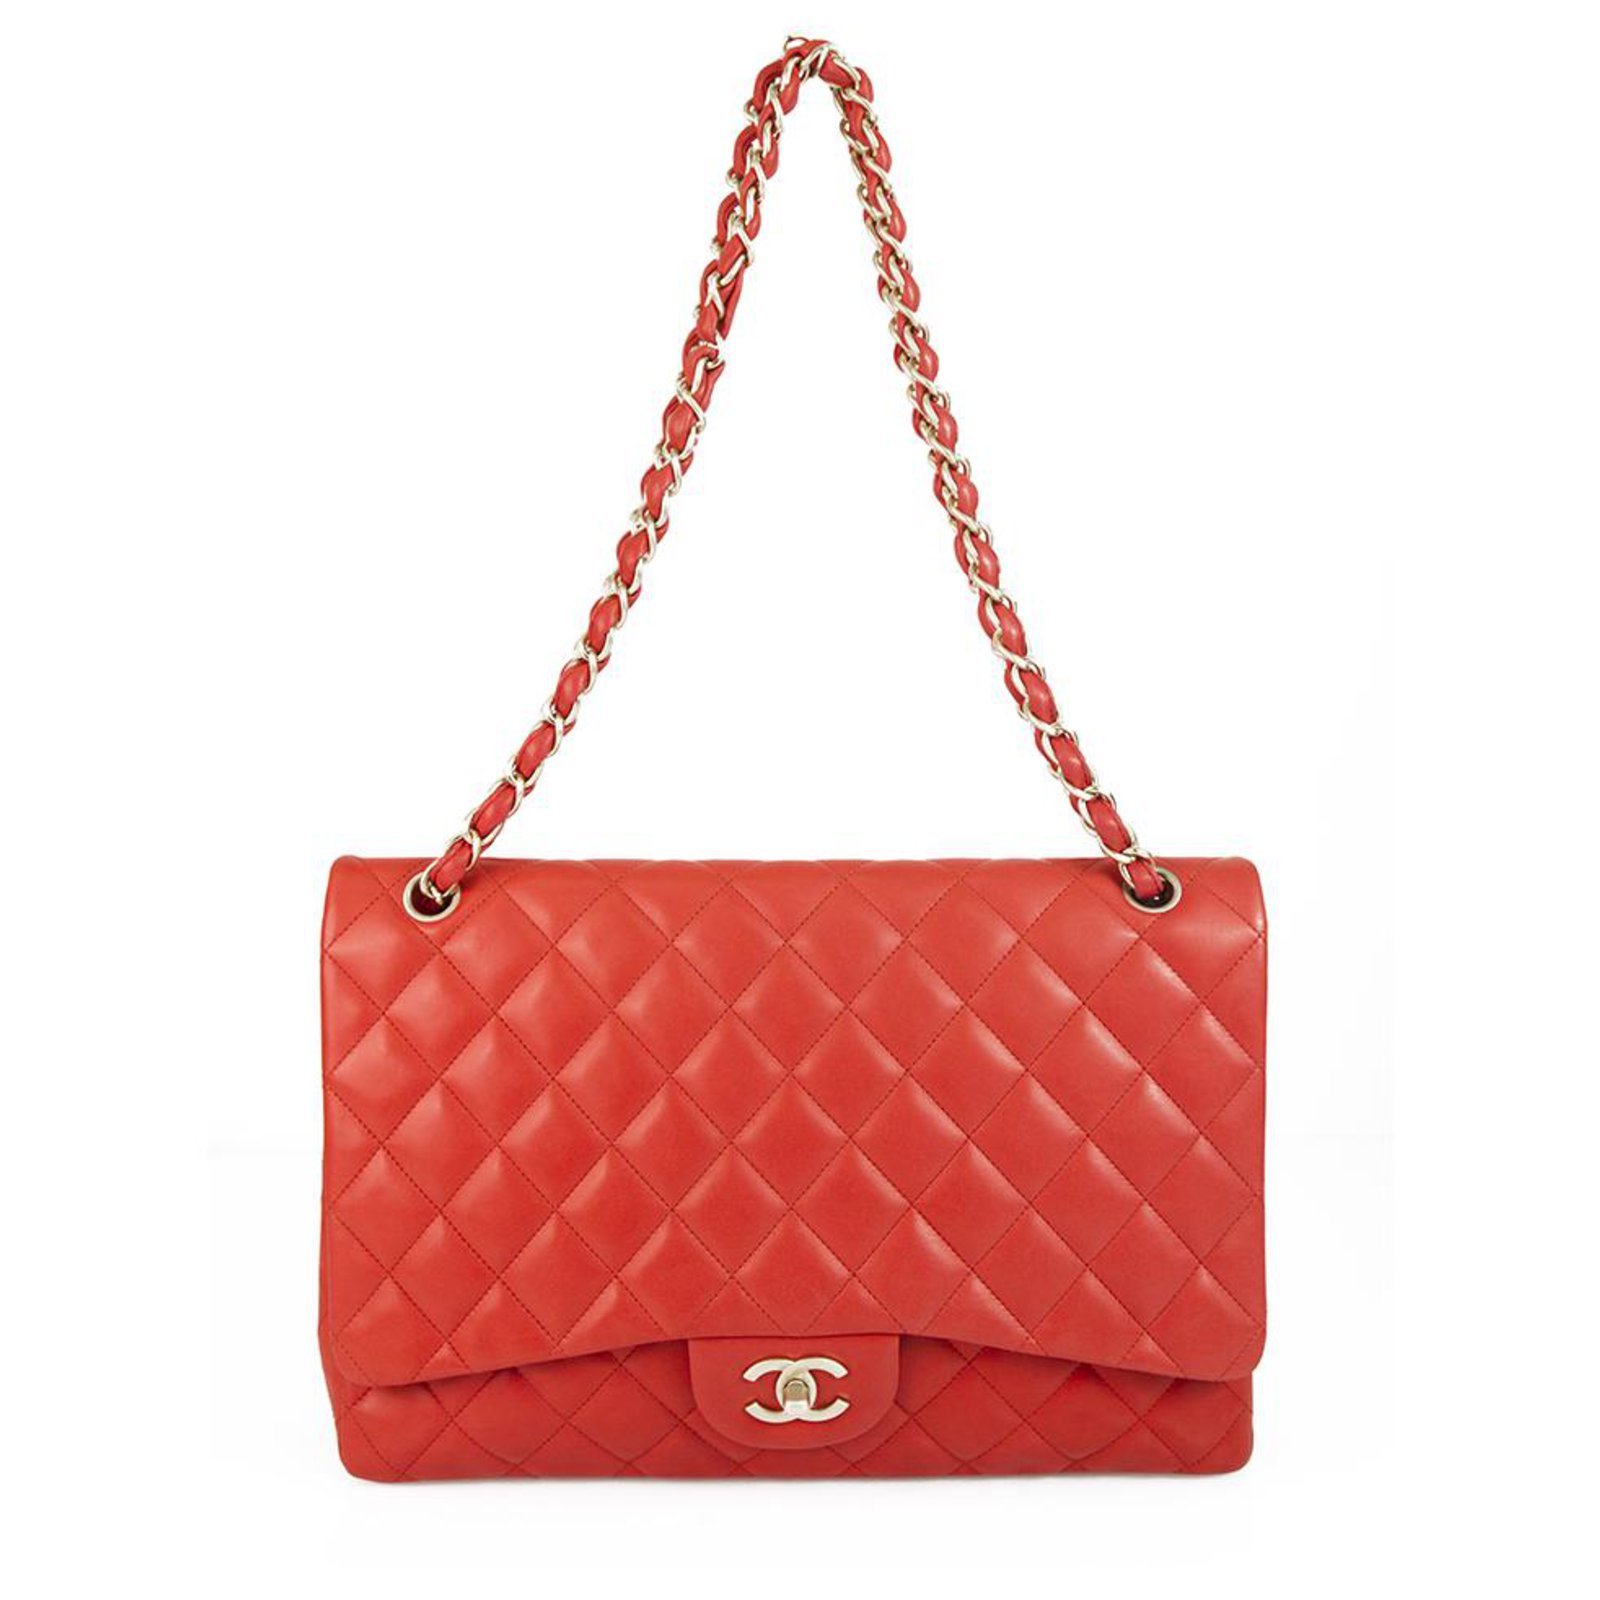 CHANEL Coral Red Lambskin Leather Classic Single Flap Jumbo Bag